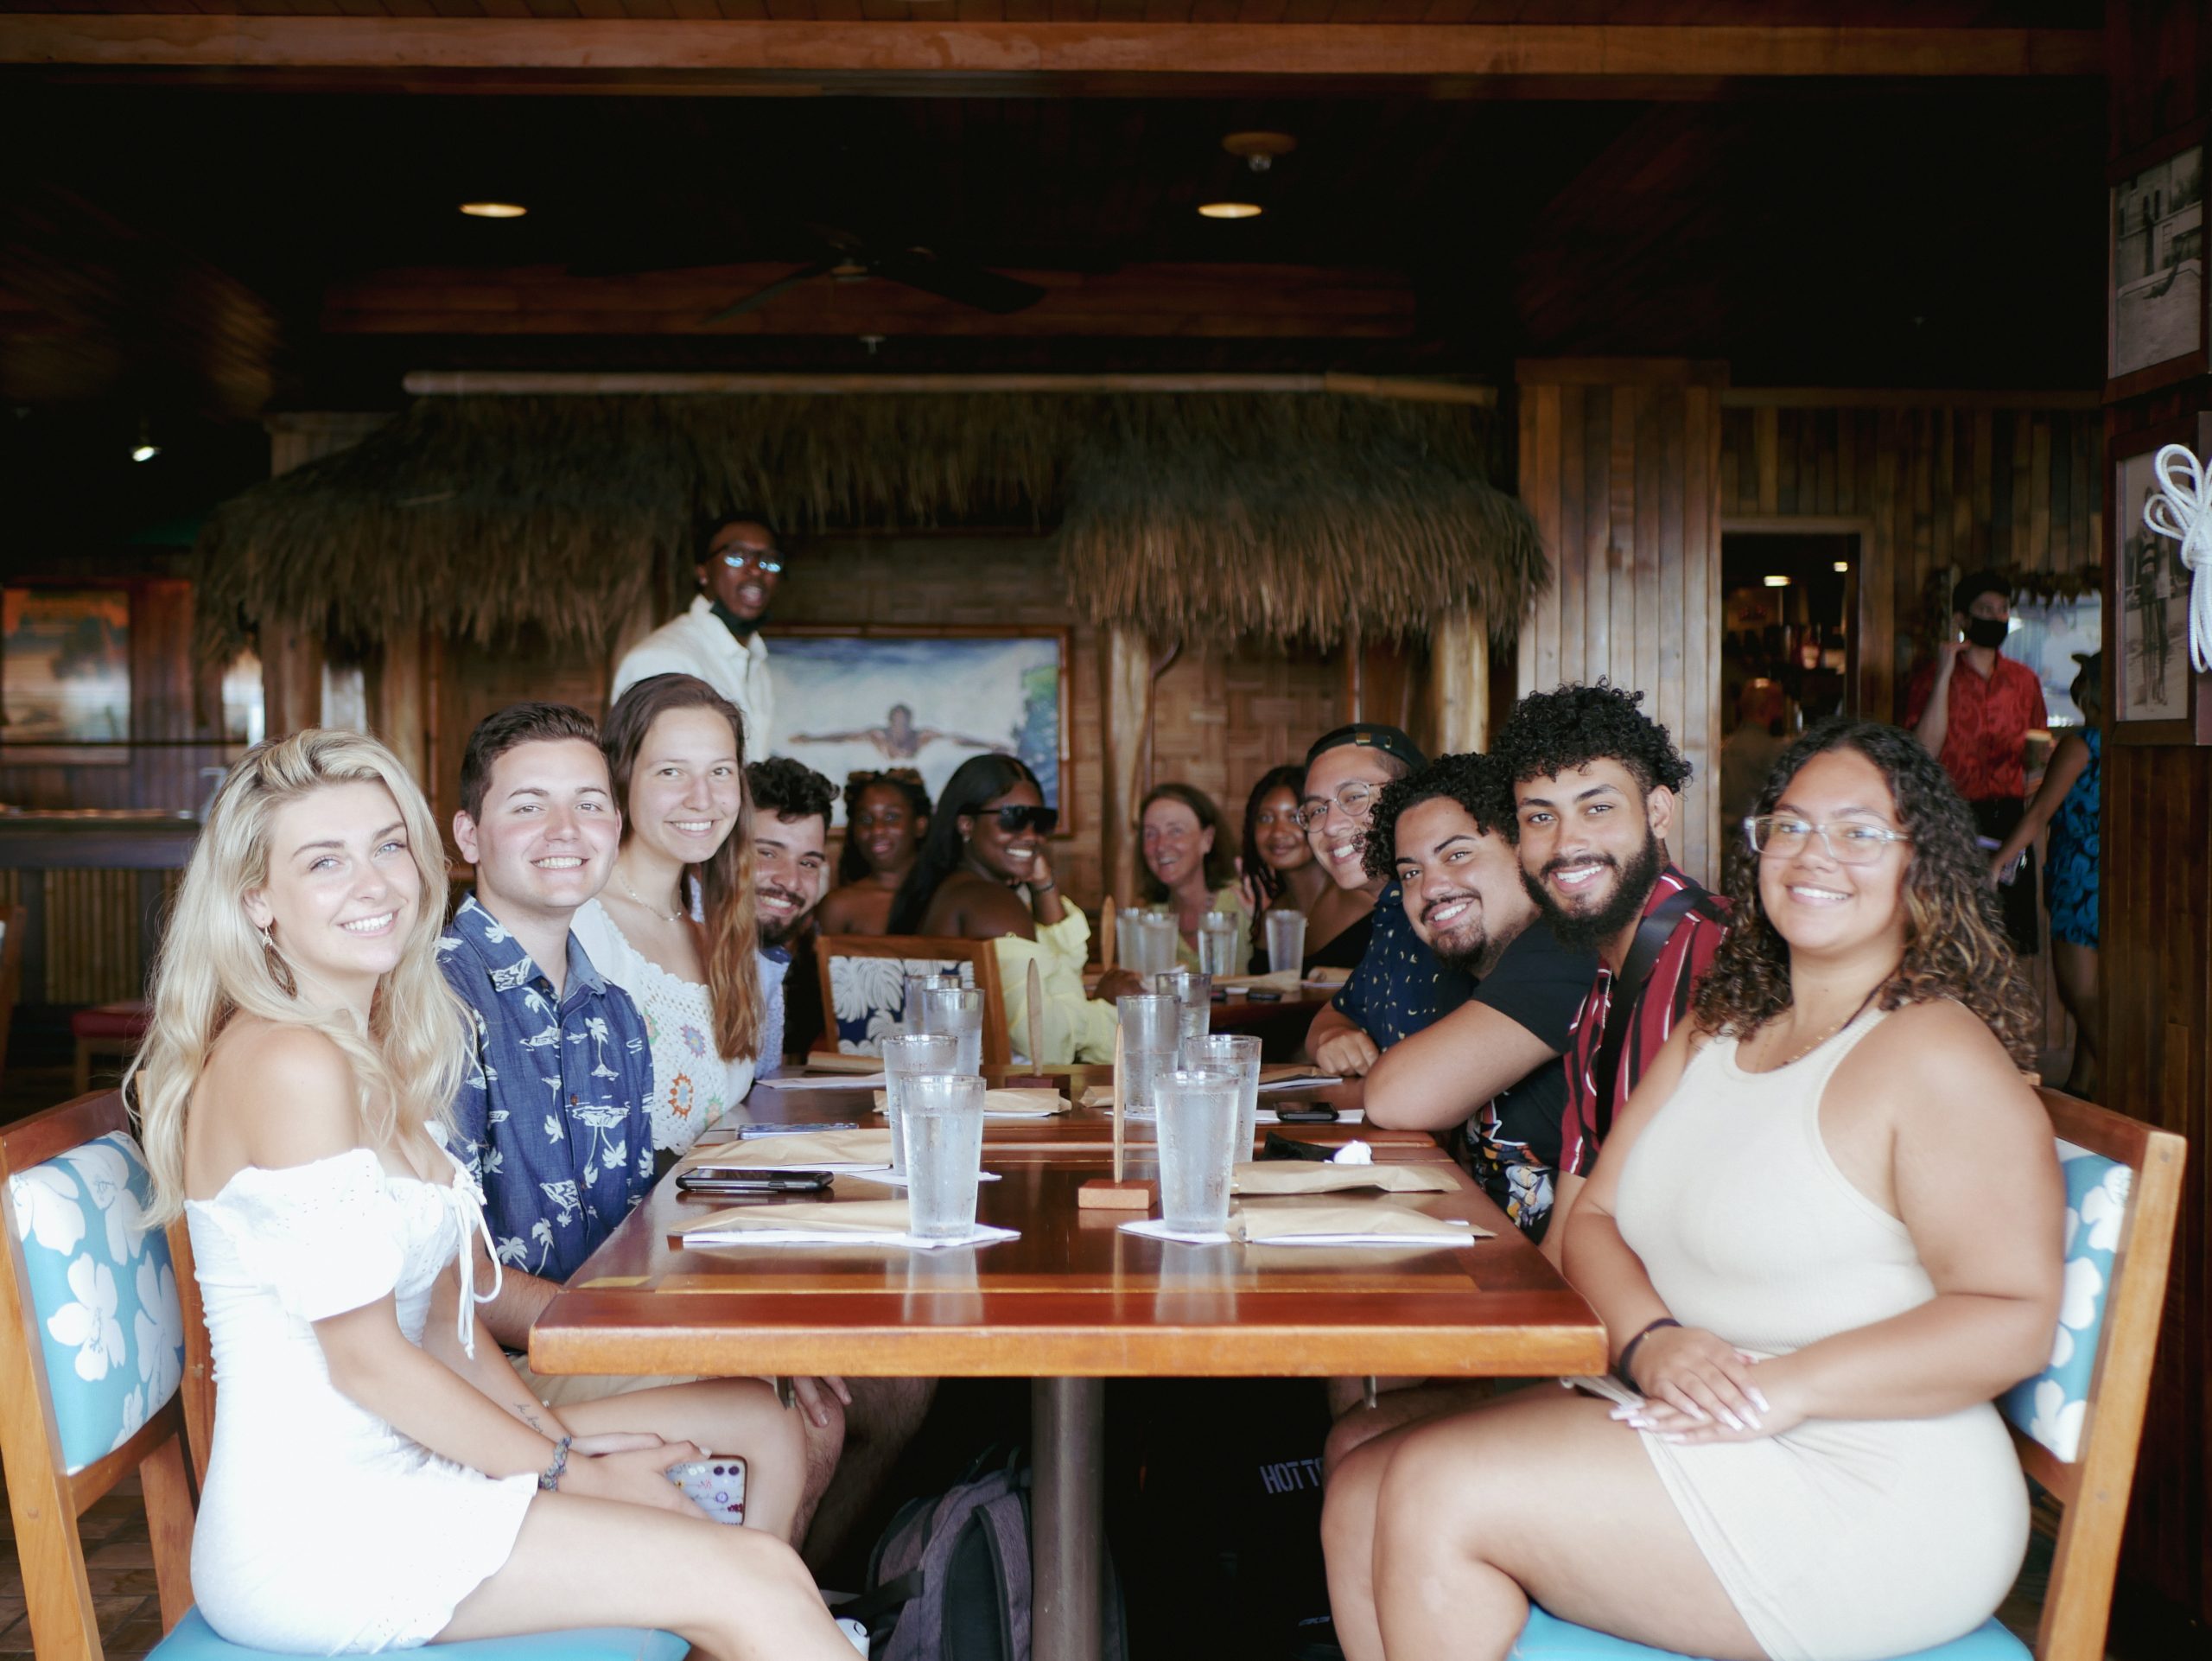 "Hawaii Group Lunch" by Prabhas KC